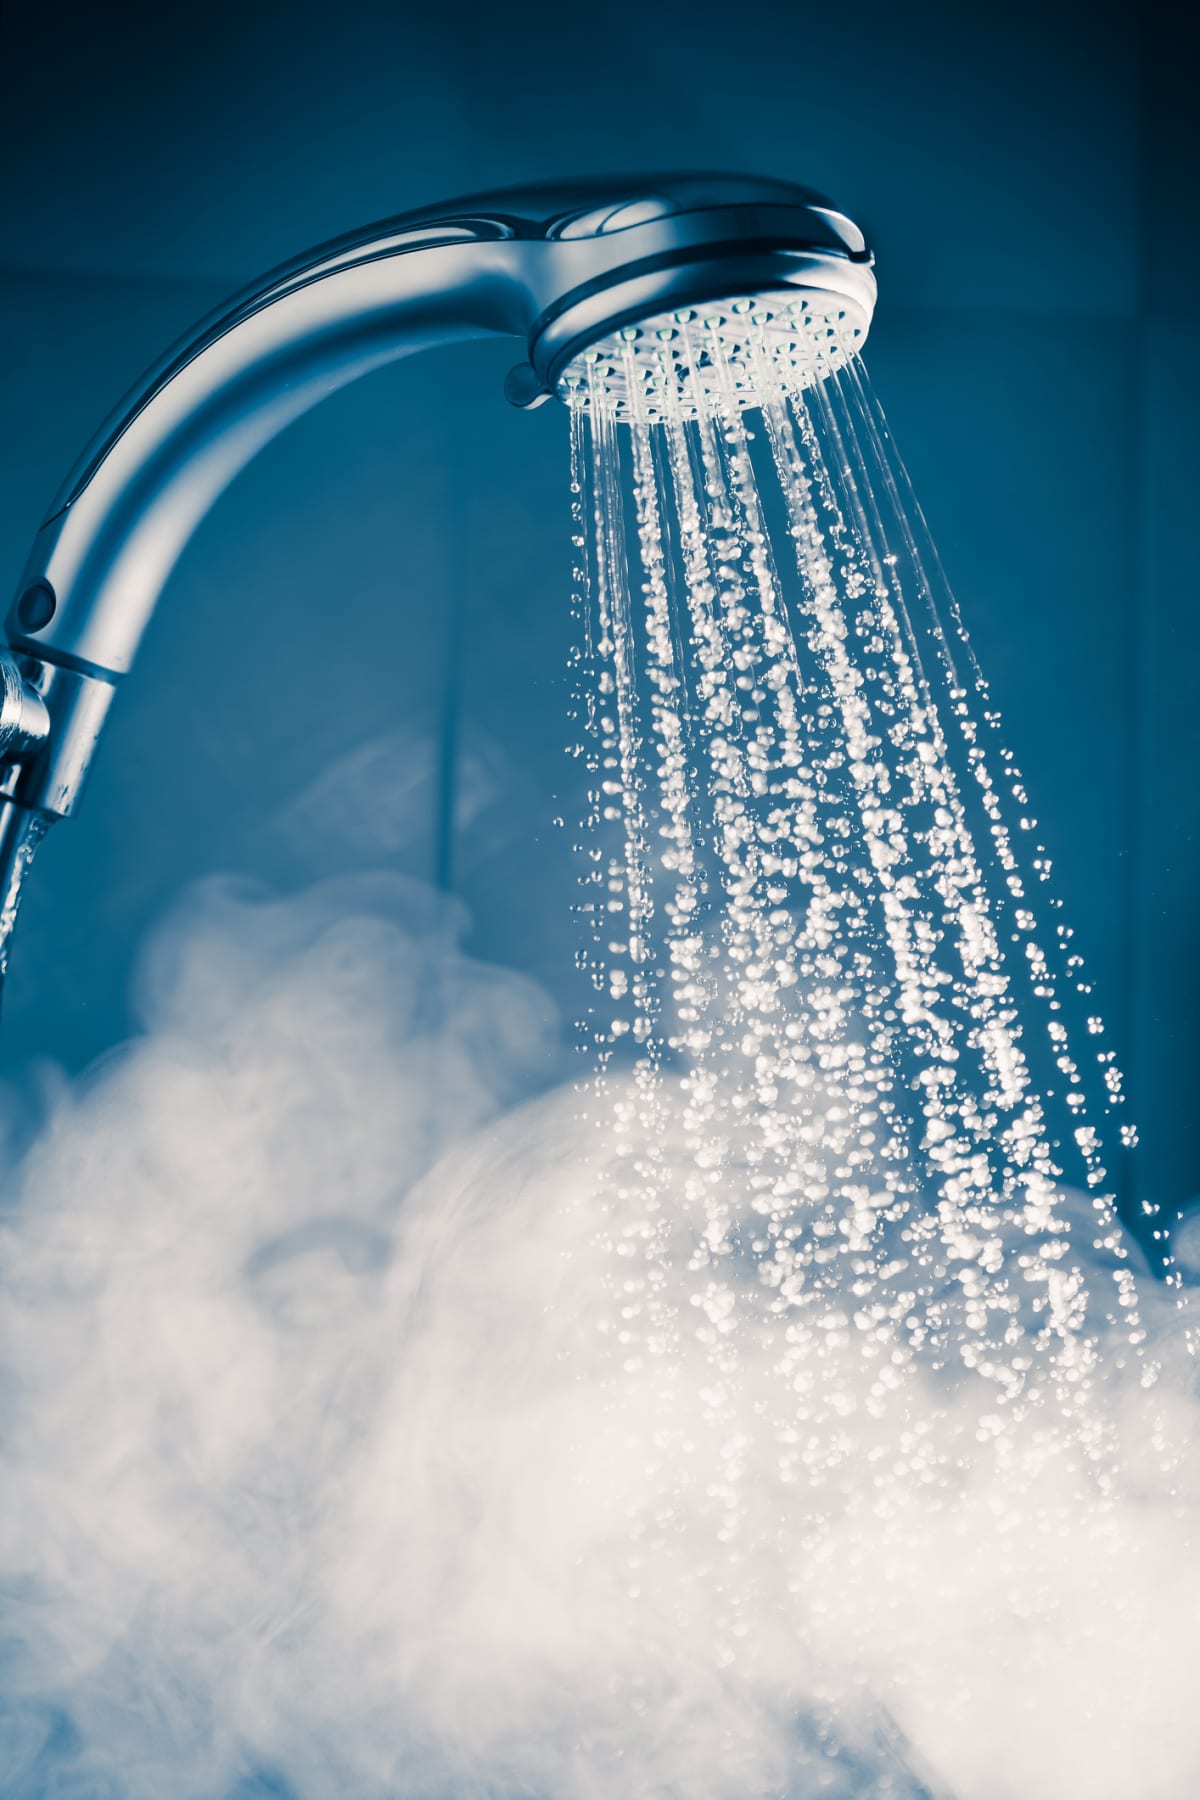 A running shower and steam against a blue background